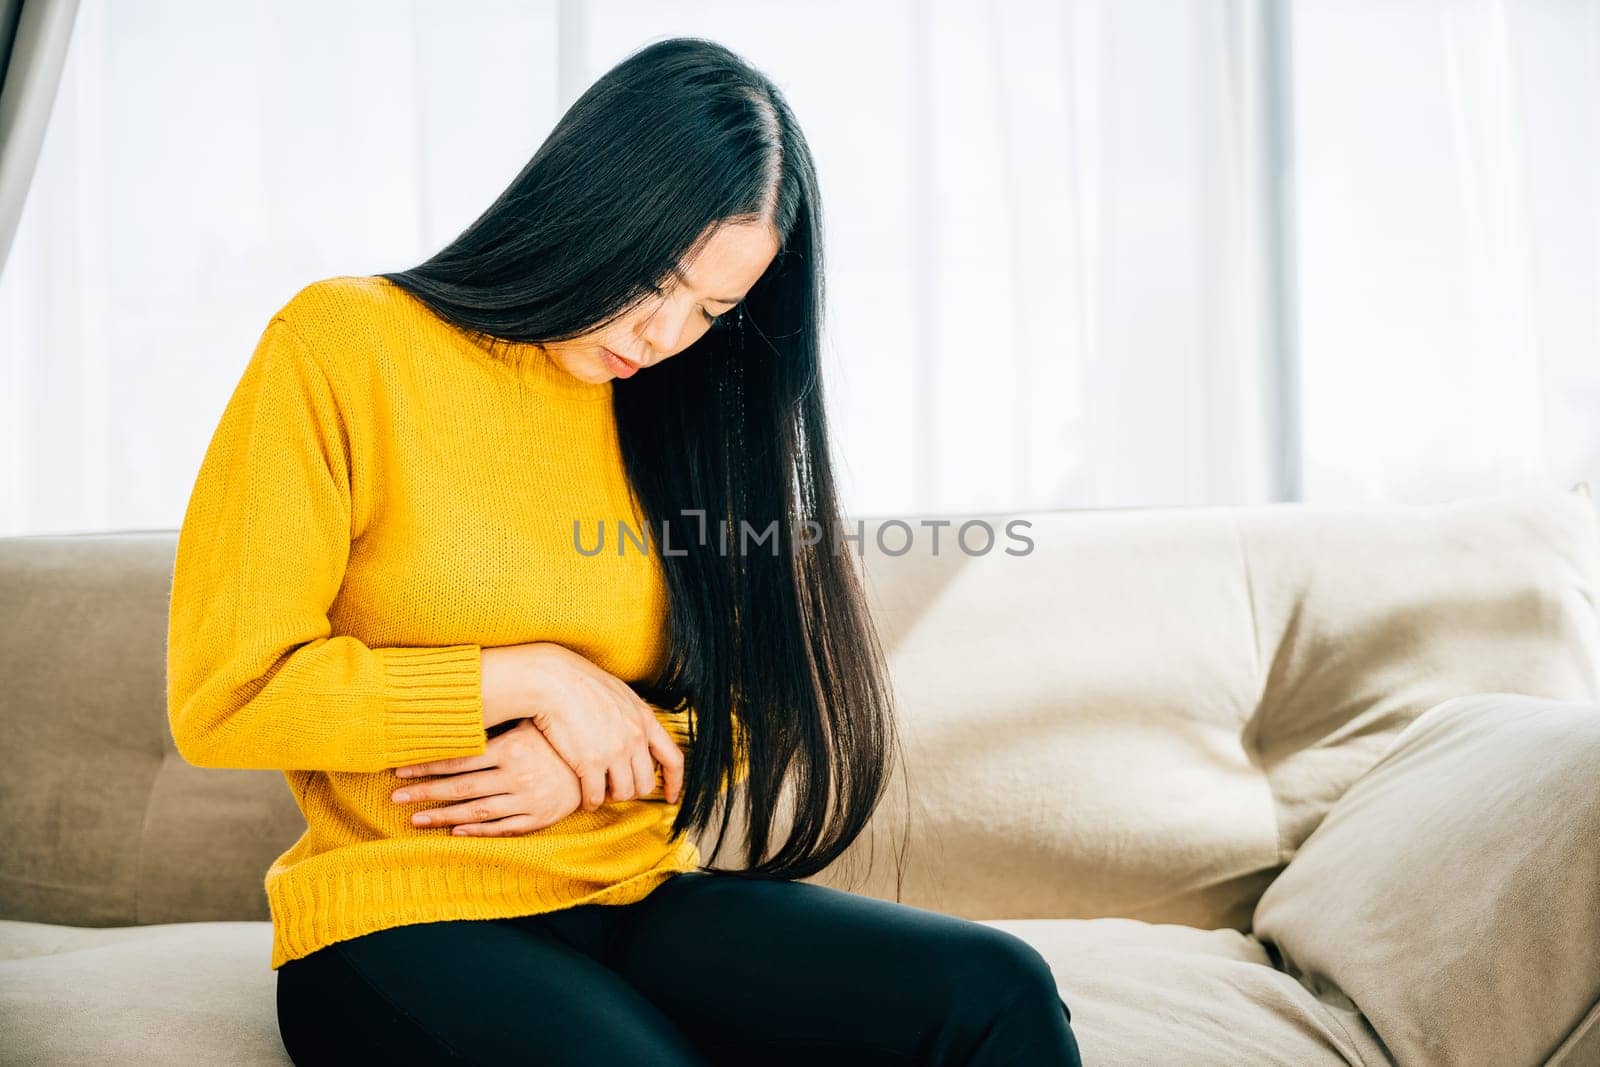 Depicting stomachache, Asian woman on home couch suffers from abdominal pain. Emphasizing discomfort symptoms and the need for medical care for stomachache. Health care abdomen bloating concept